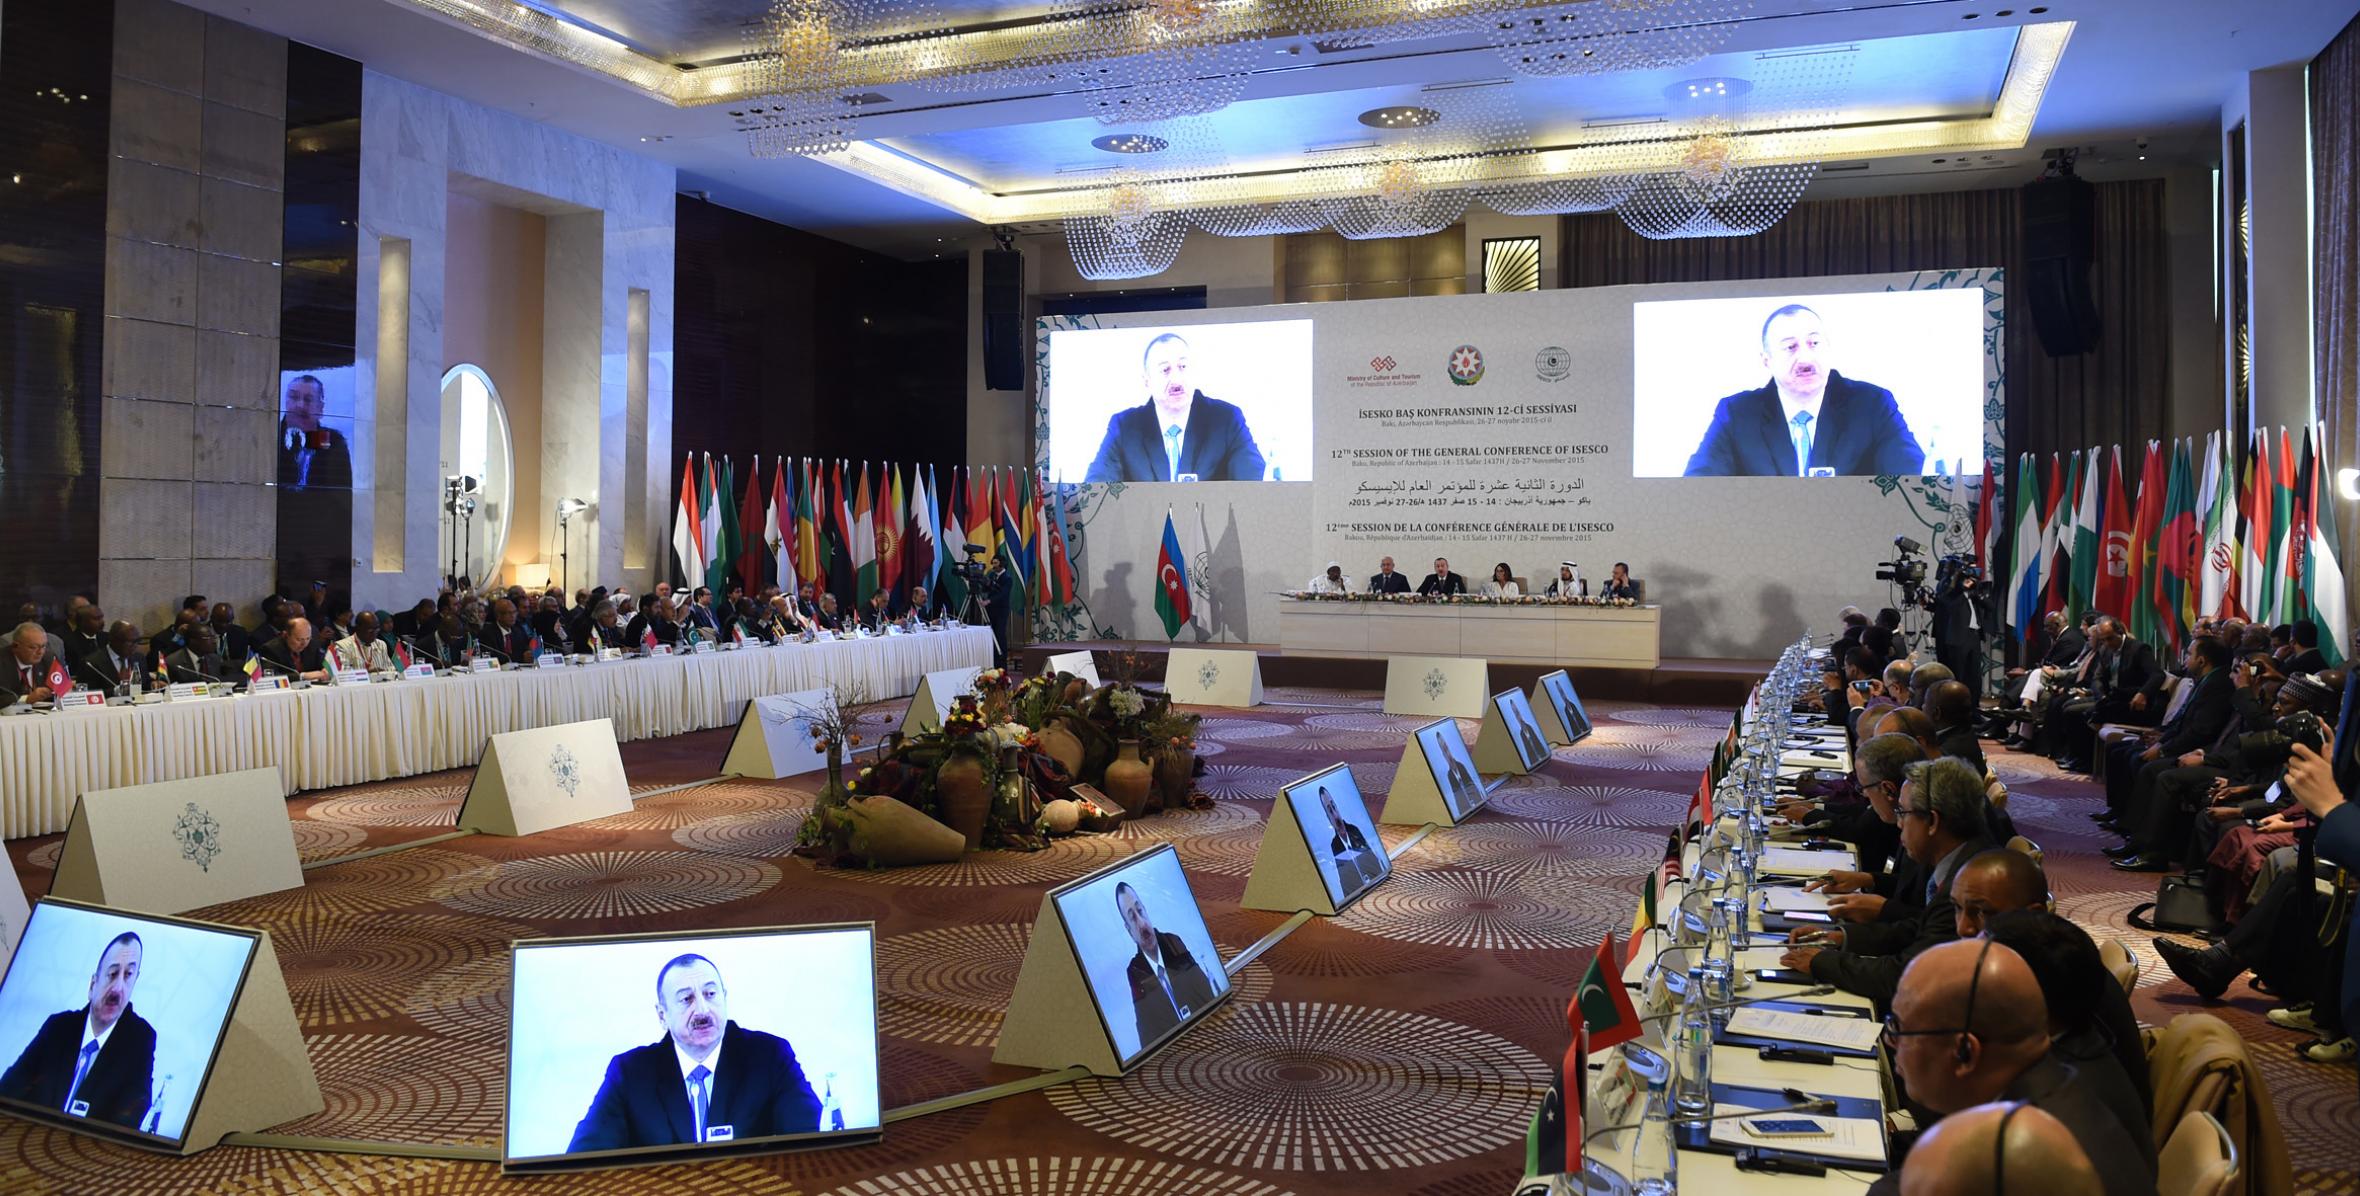 Ilham Aliyev attended the opening of the 12th session of ISESCO General Conference